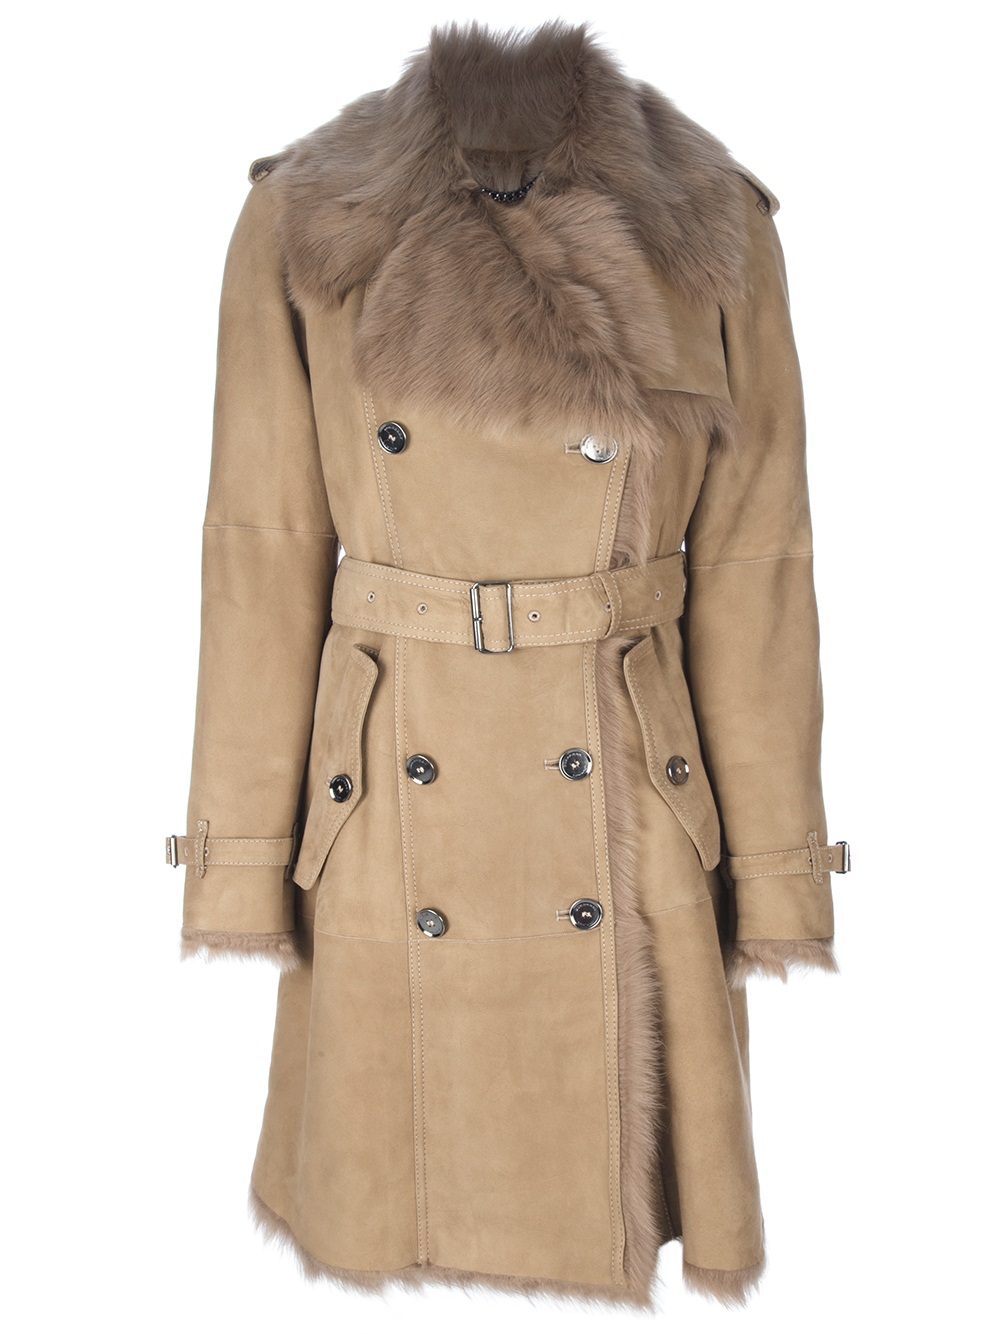 Burberry Shearling Trench Coat in Brown - Lyst